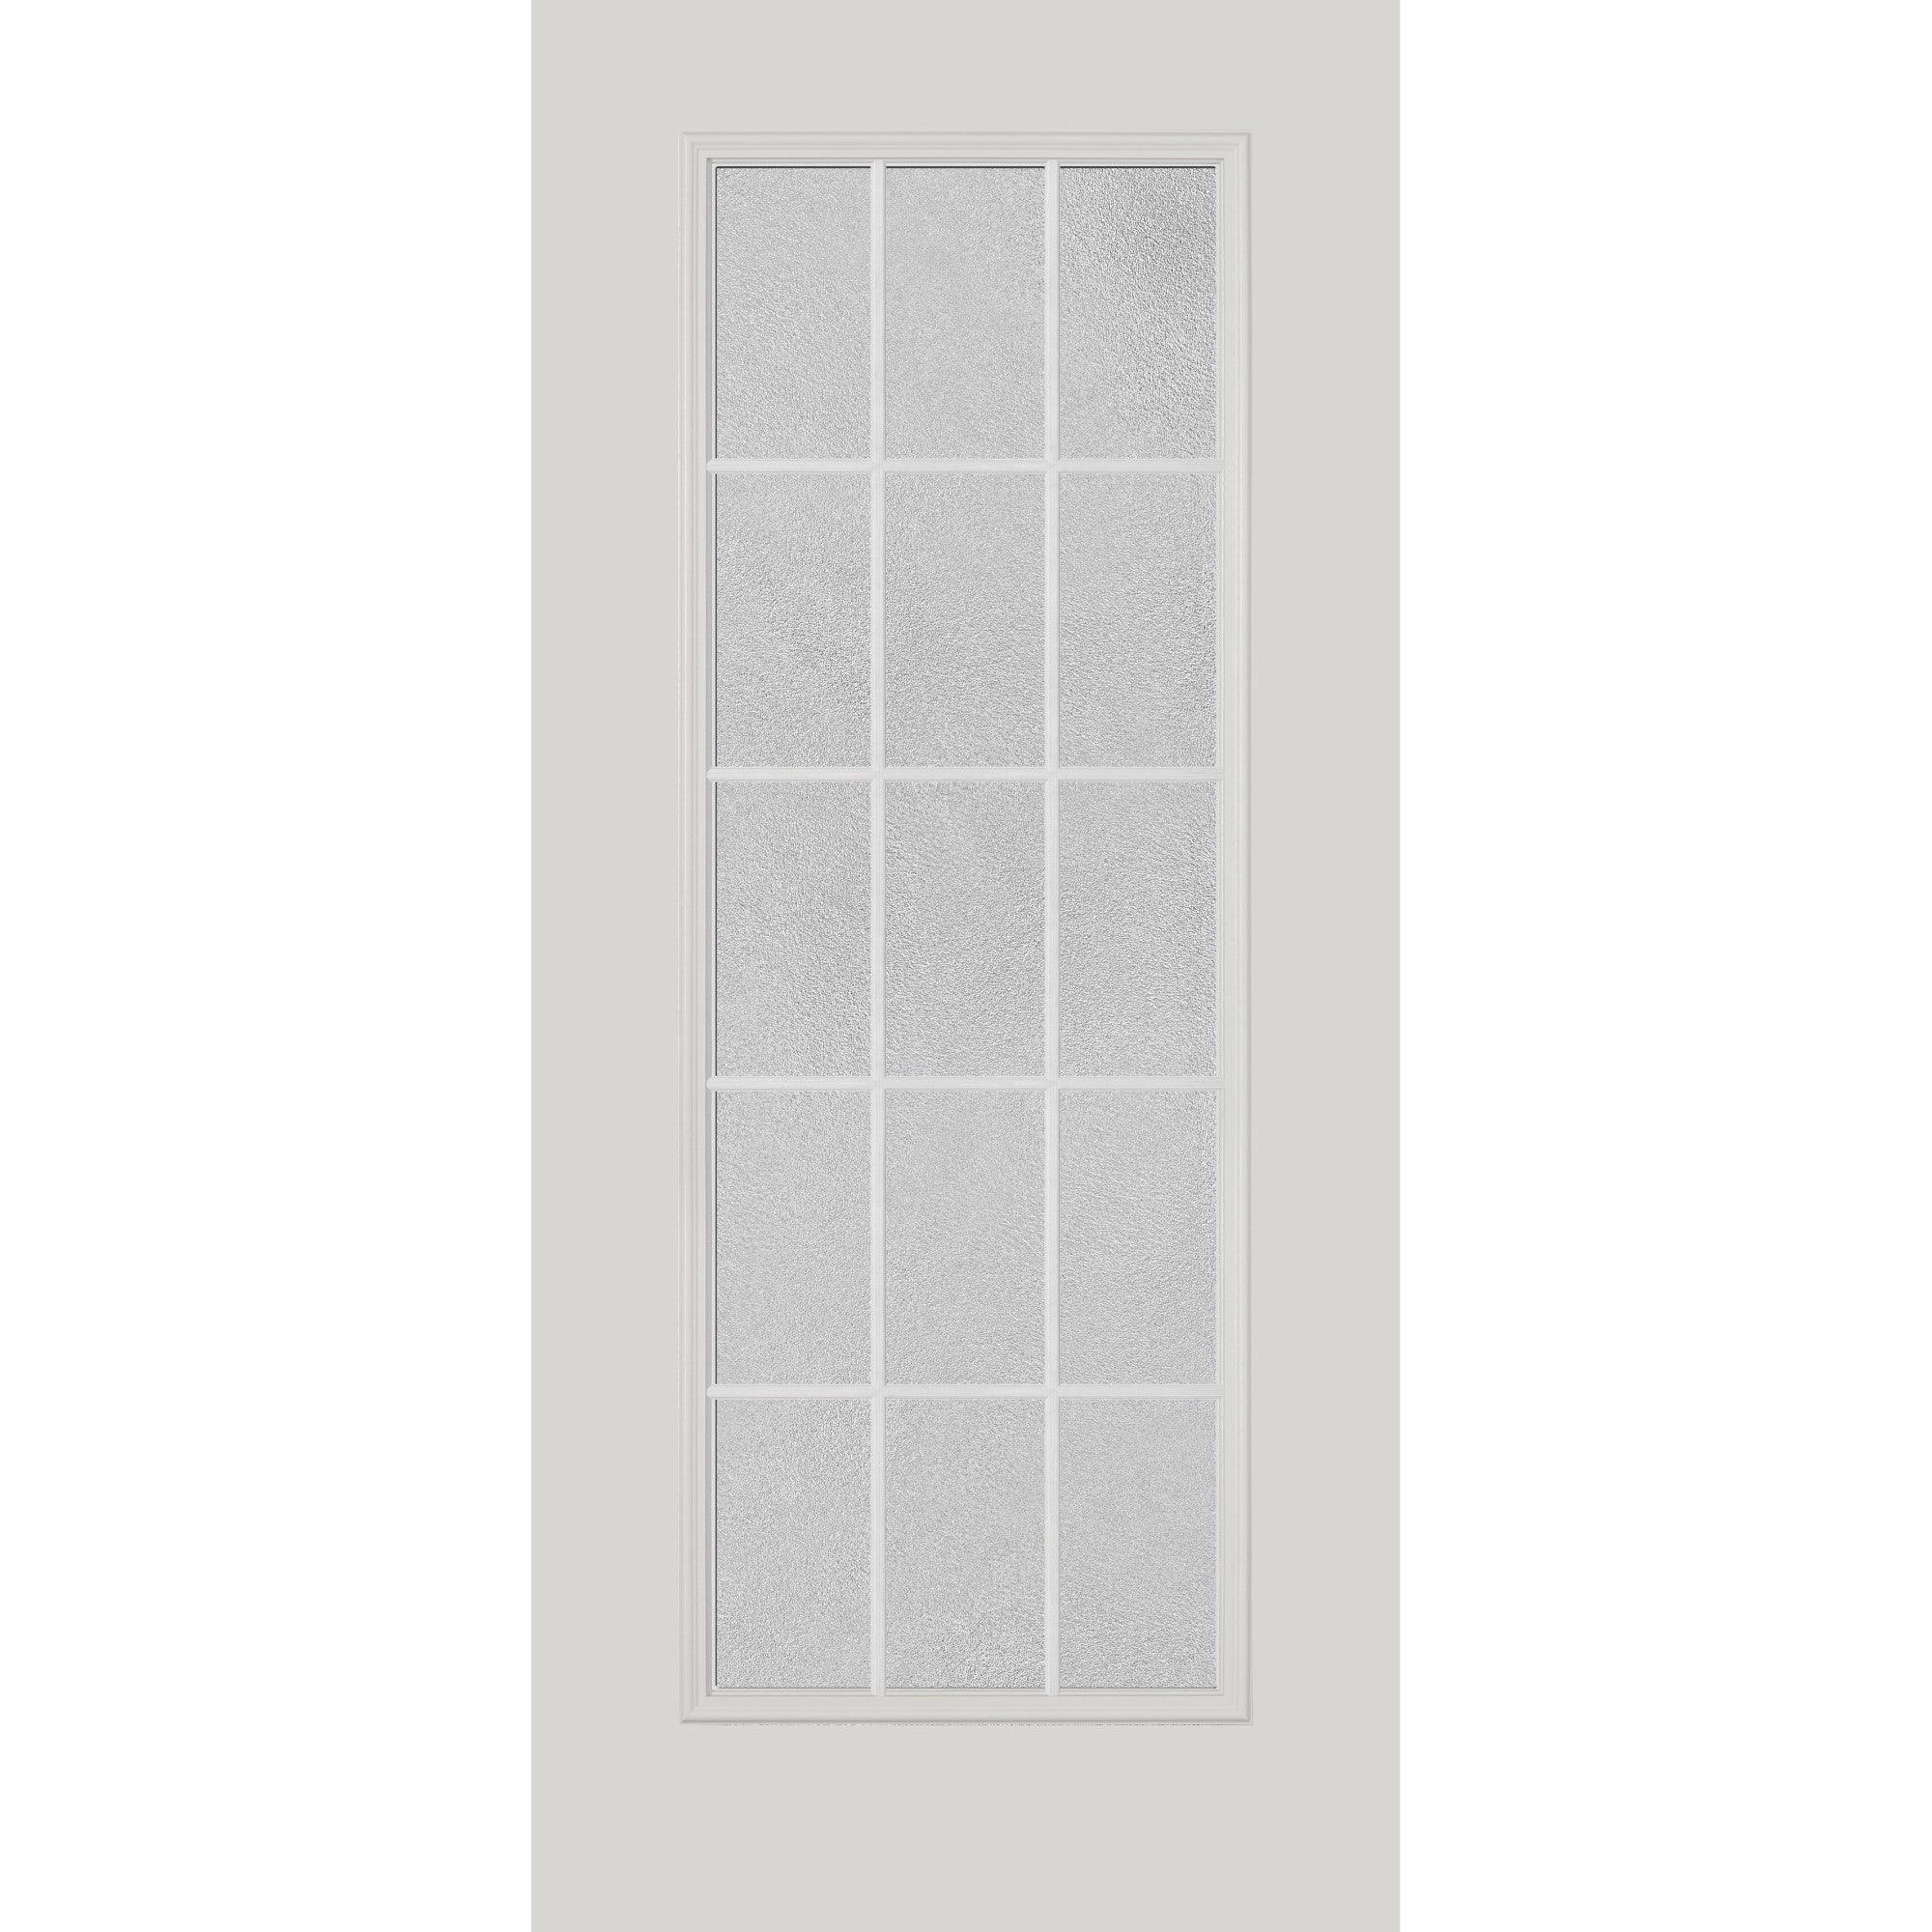 Clear Simulated 15 Lite Glass and Frame Kit (Full Lite 24" x 66" Frame Size) - Pease Doors: The Door Store